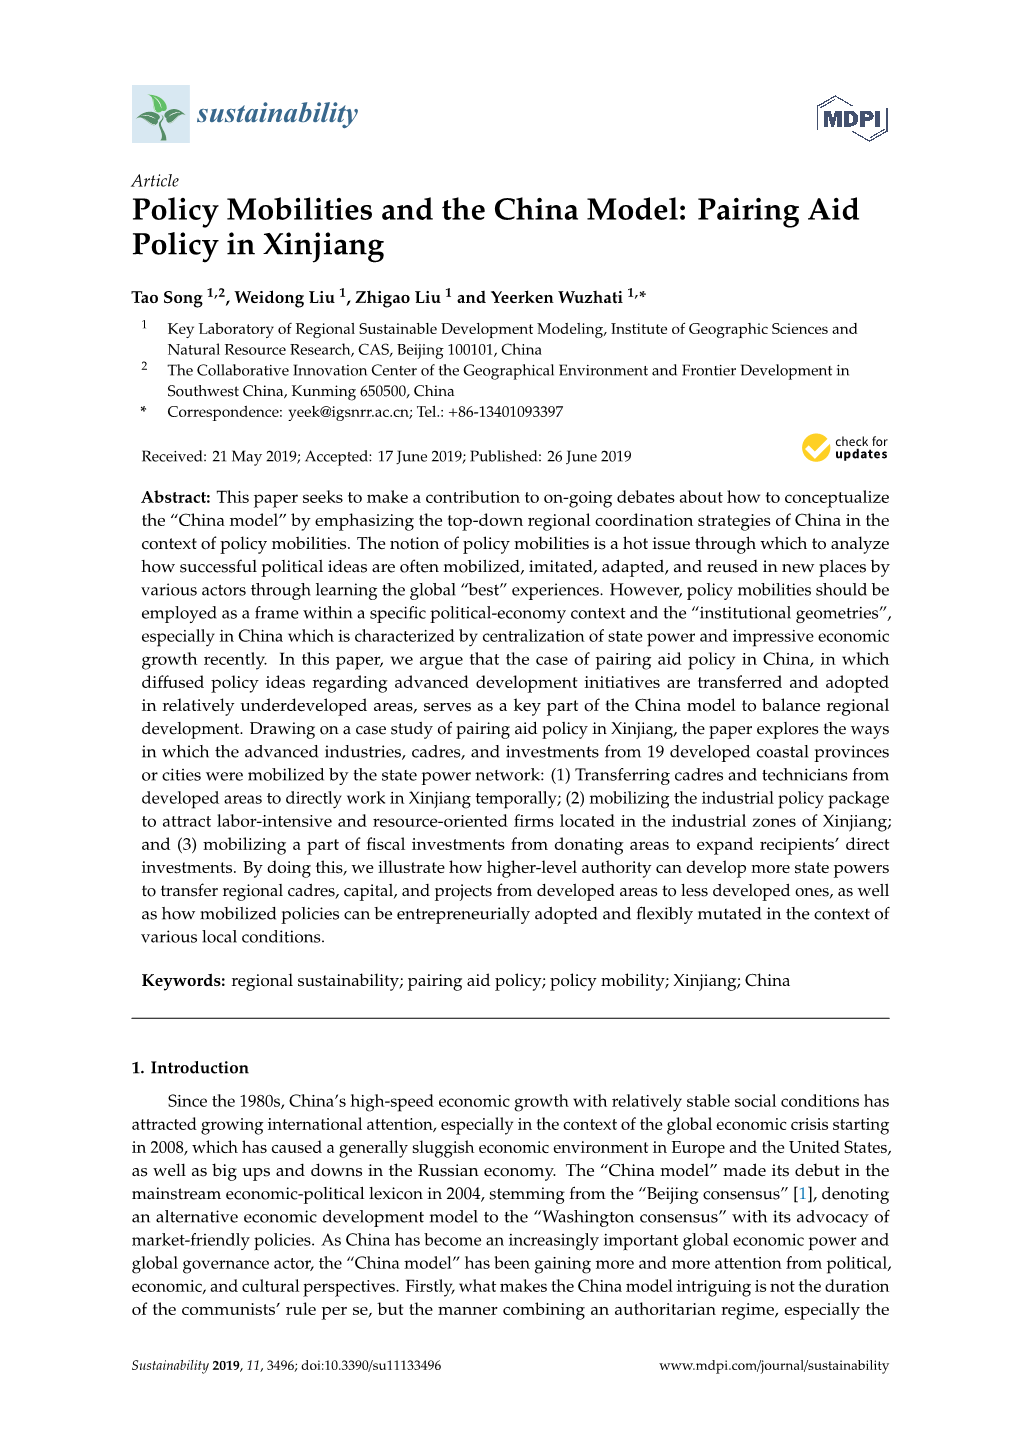 Policy Mobilities and the China Model: Pairing Aid Policy in Xinjiang